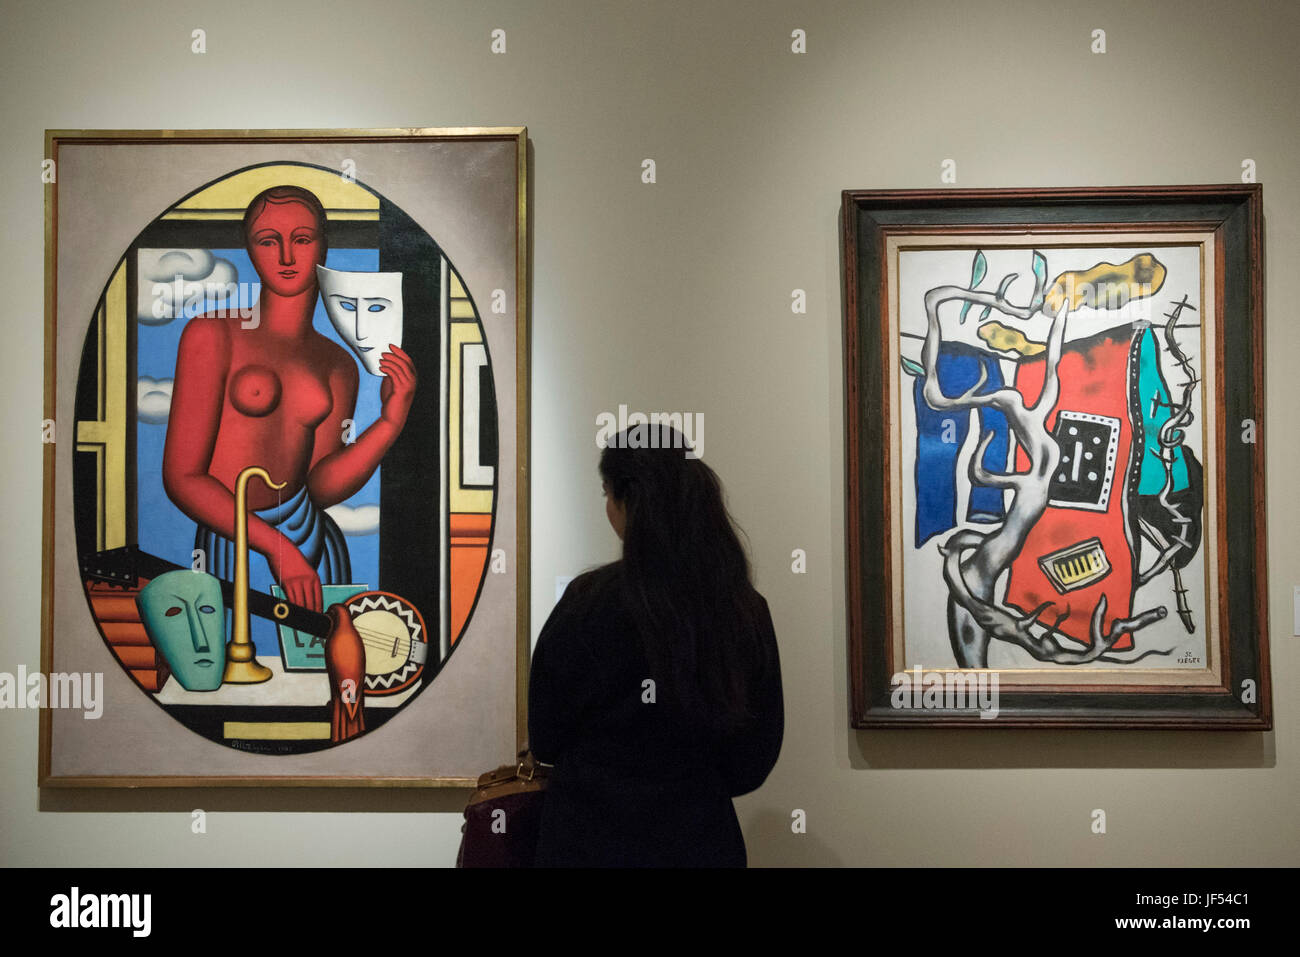 London, UK.  29 June 2017.  A woman views (L to R) 'Les Masques', 1928, by Jean Metzinger and 'Le Tapis Rouge Dans Le Paysage', 1952, by Fernand Léger during a visit to Masterpiece London, a leading art fair held in the grounds of the Royal Hospital Chelsea.  The fair brings together 150 international exhibitors presenting works from antiquity to the present day and runs 29 June to 5 July 2017. .   Credit: Stephen Chung / Alamy Live News Stock Photo